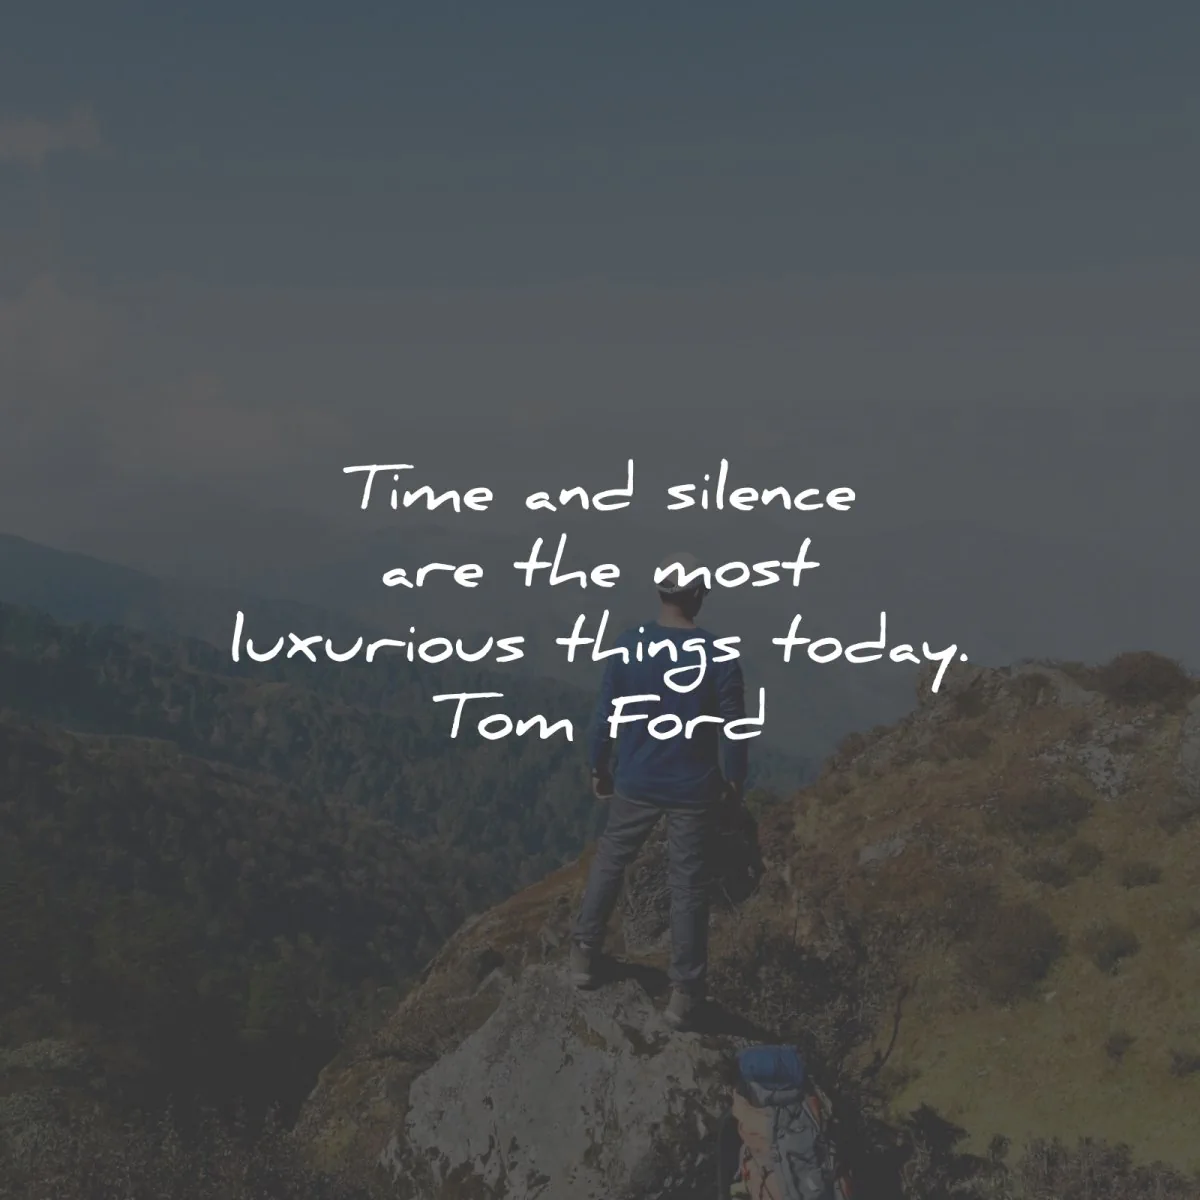 silence quotes time most luxurious tom ford wisdom